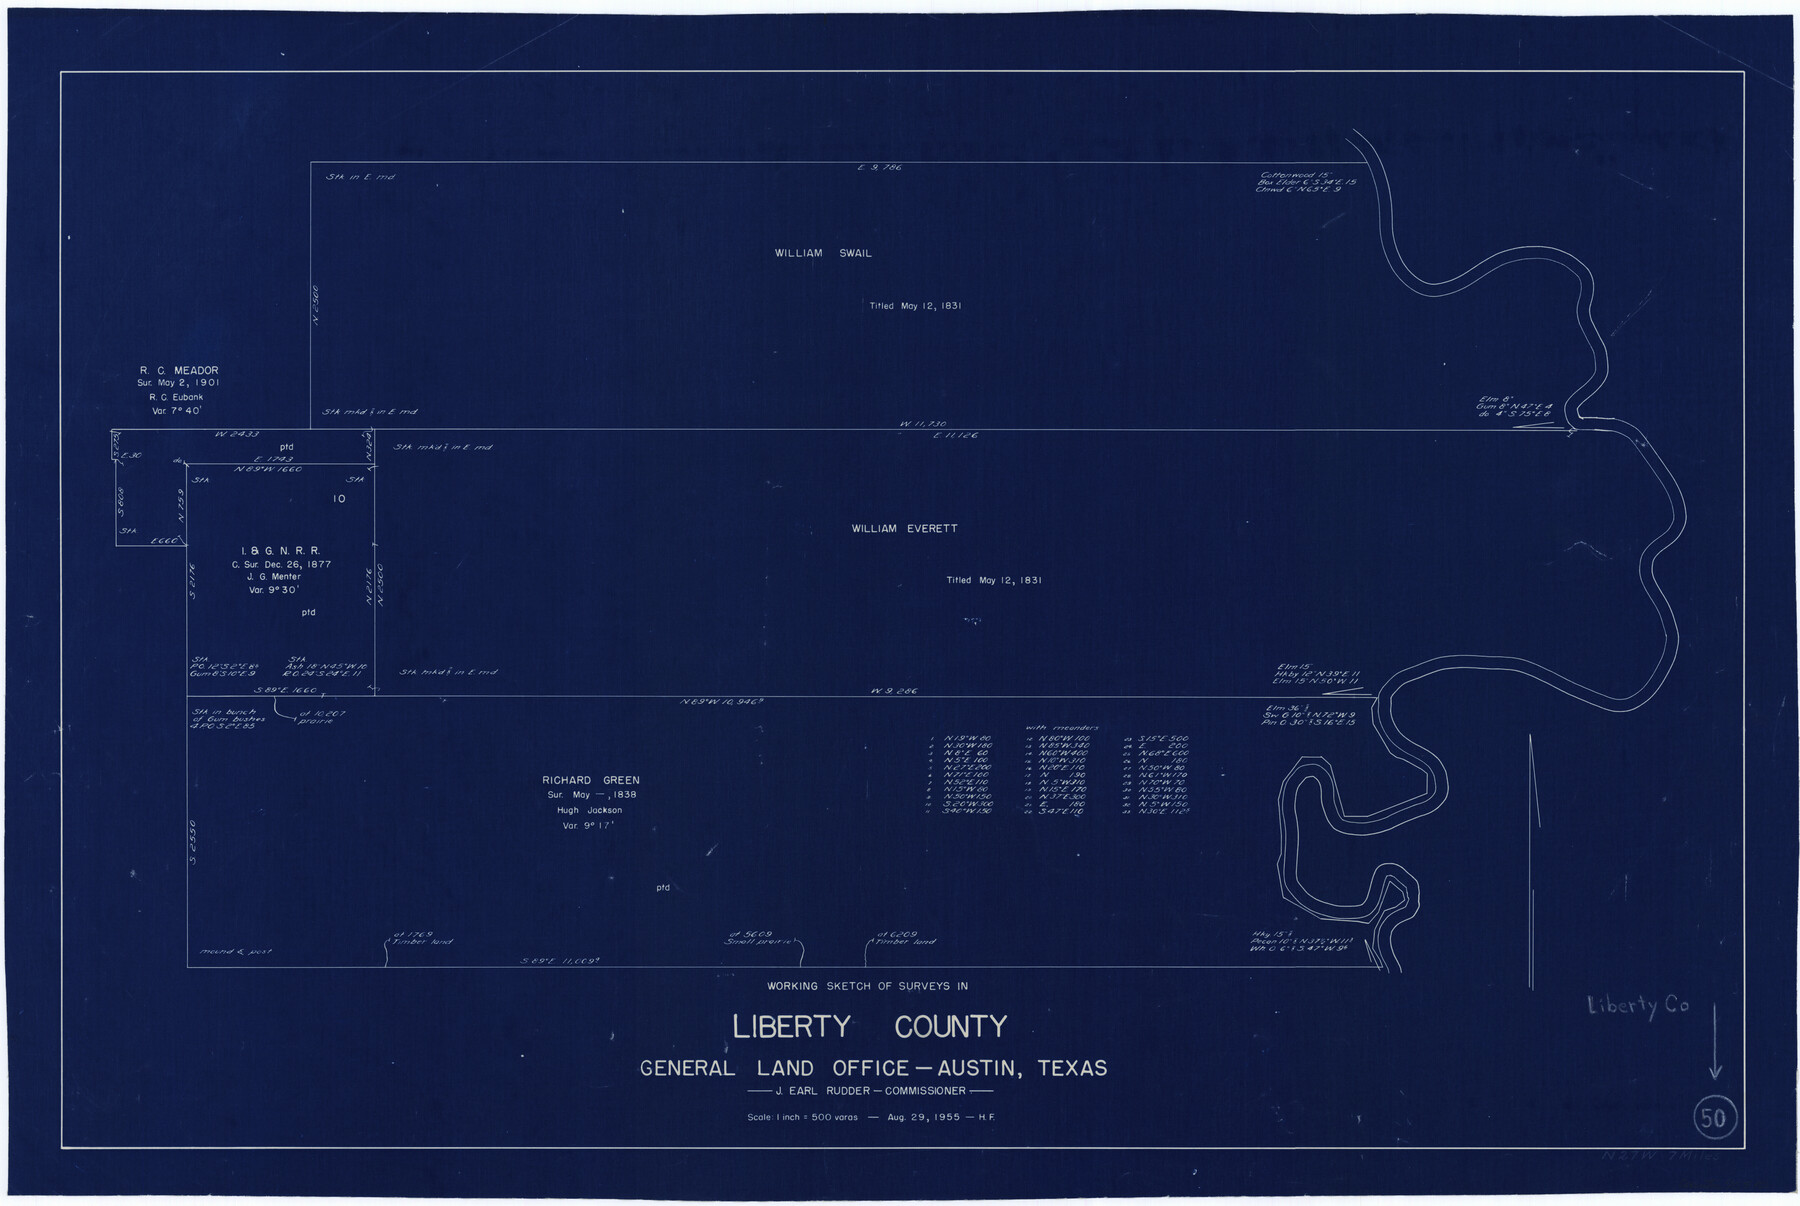 70510, Liberty County Working Sketch 50, General Map Collection